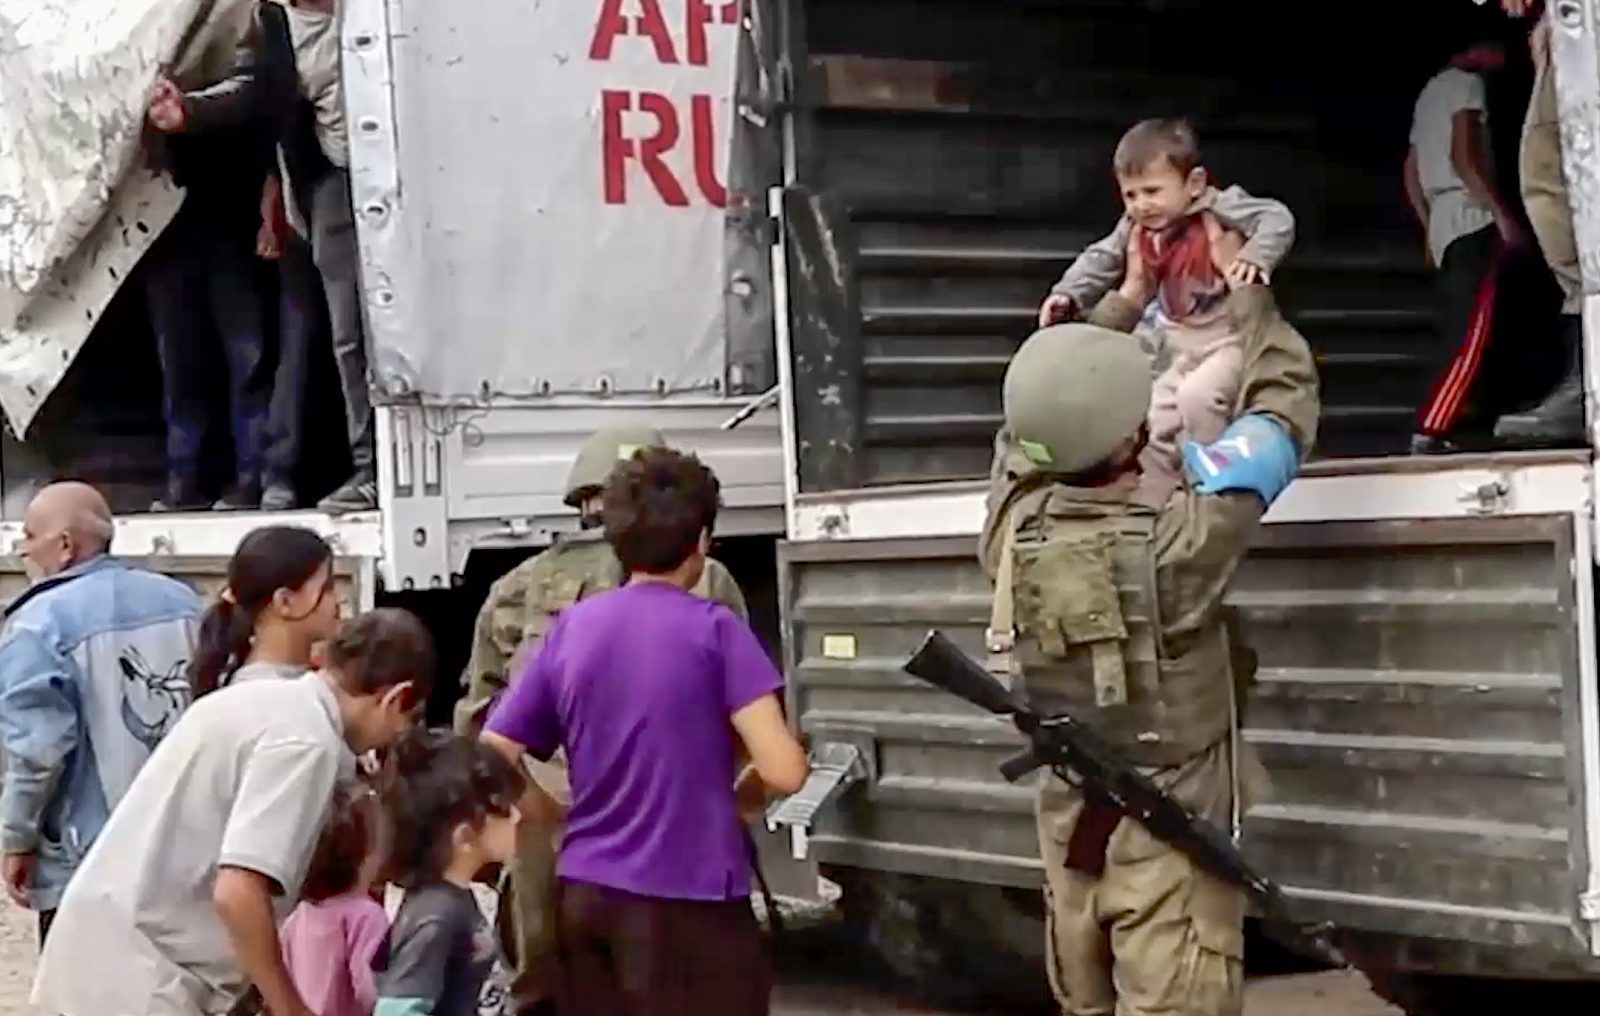 epa10882540 A still image taken from a handout video provided by the Russian Defence Ministry press-service shows Russian peacekeepers evacuating Nagorno-Karabakh civilians at an undisclosed location, 25 September 2023. Over the past 24 hours, Russian military personnel ensured the delivery of 190 tons of cargo with food and fuel and other aid for the civilian population of Karabakh, the Russian Ministry of Defence said on 25 September. Russian peacekeepers escorted the transport of civilians from the Martuni region, delivering 70 people to Stepanakert, the ministry added. Some 715 civilians, including 402 children, have been taken to the Russian peacekeeping contingent, where they have been provided with accommodation, food and medical assistance. Azerbaijan on 19 September 2023 launched a brief military offensive on the contested region of Nagorno-Karabakh, a breakaway enclave that is home to some 120,000 ethnic Armenians. The Armenian government announced the evacuation of about 3,000 local residents from the region following the ceasefire agreed on 20 September 2023, as Azerbaijan opened all checkpoints with Armenia for the unimpeded exit of civilians from the territory of Nagorno-Karabakh. Russian peacekeepers escorted convoys of civilians from Nagorno-Karabakh leaving for Armenia, the Russian Ministry of Defense reported.  EPA/RUSSIAN DEFENCE MINISTRY PRESS SERVICE HANDOUT -- MANDATORY CREDIT -- BEST QUALITY AVAILABLE -- HANDOUT EDITORIAL USE ONLY/NO SALES